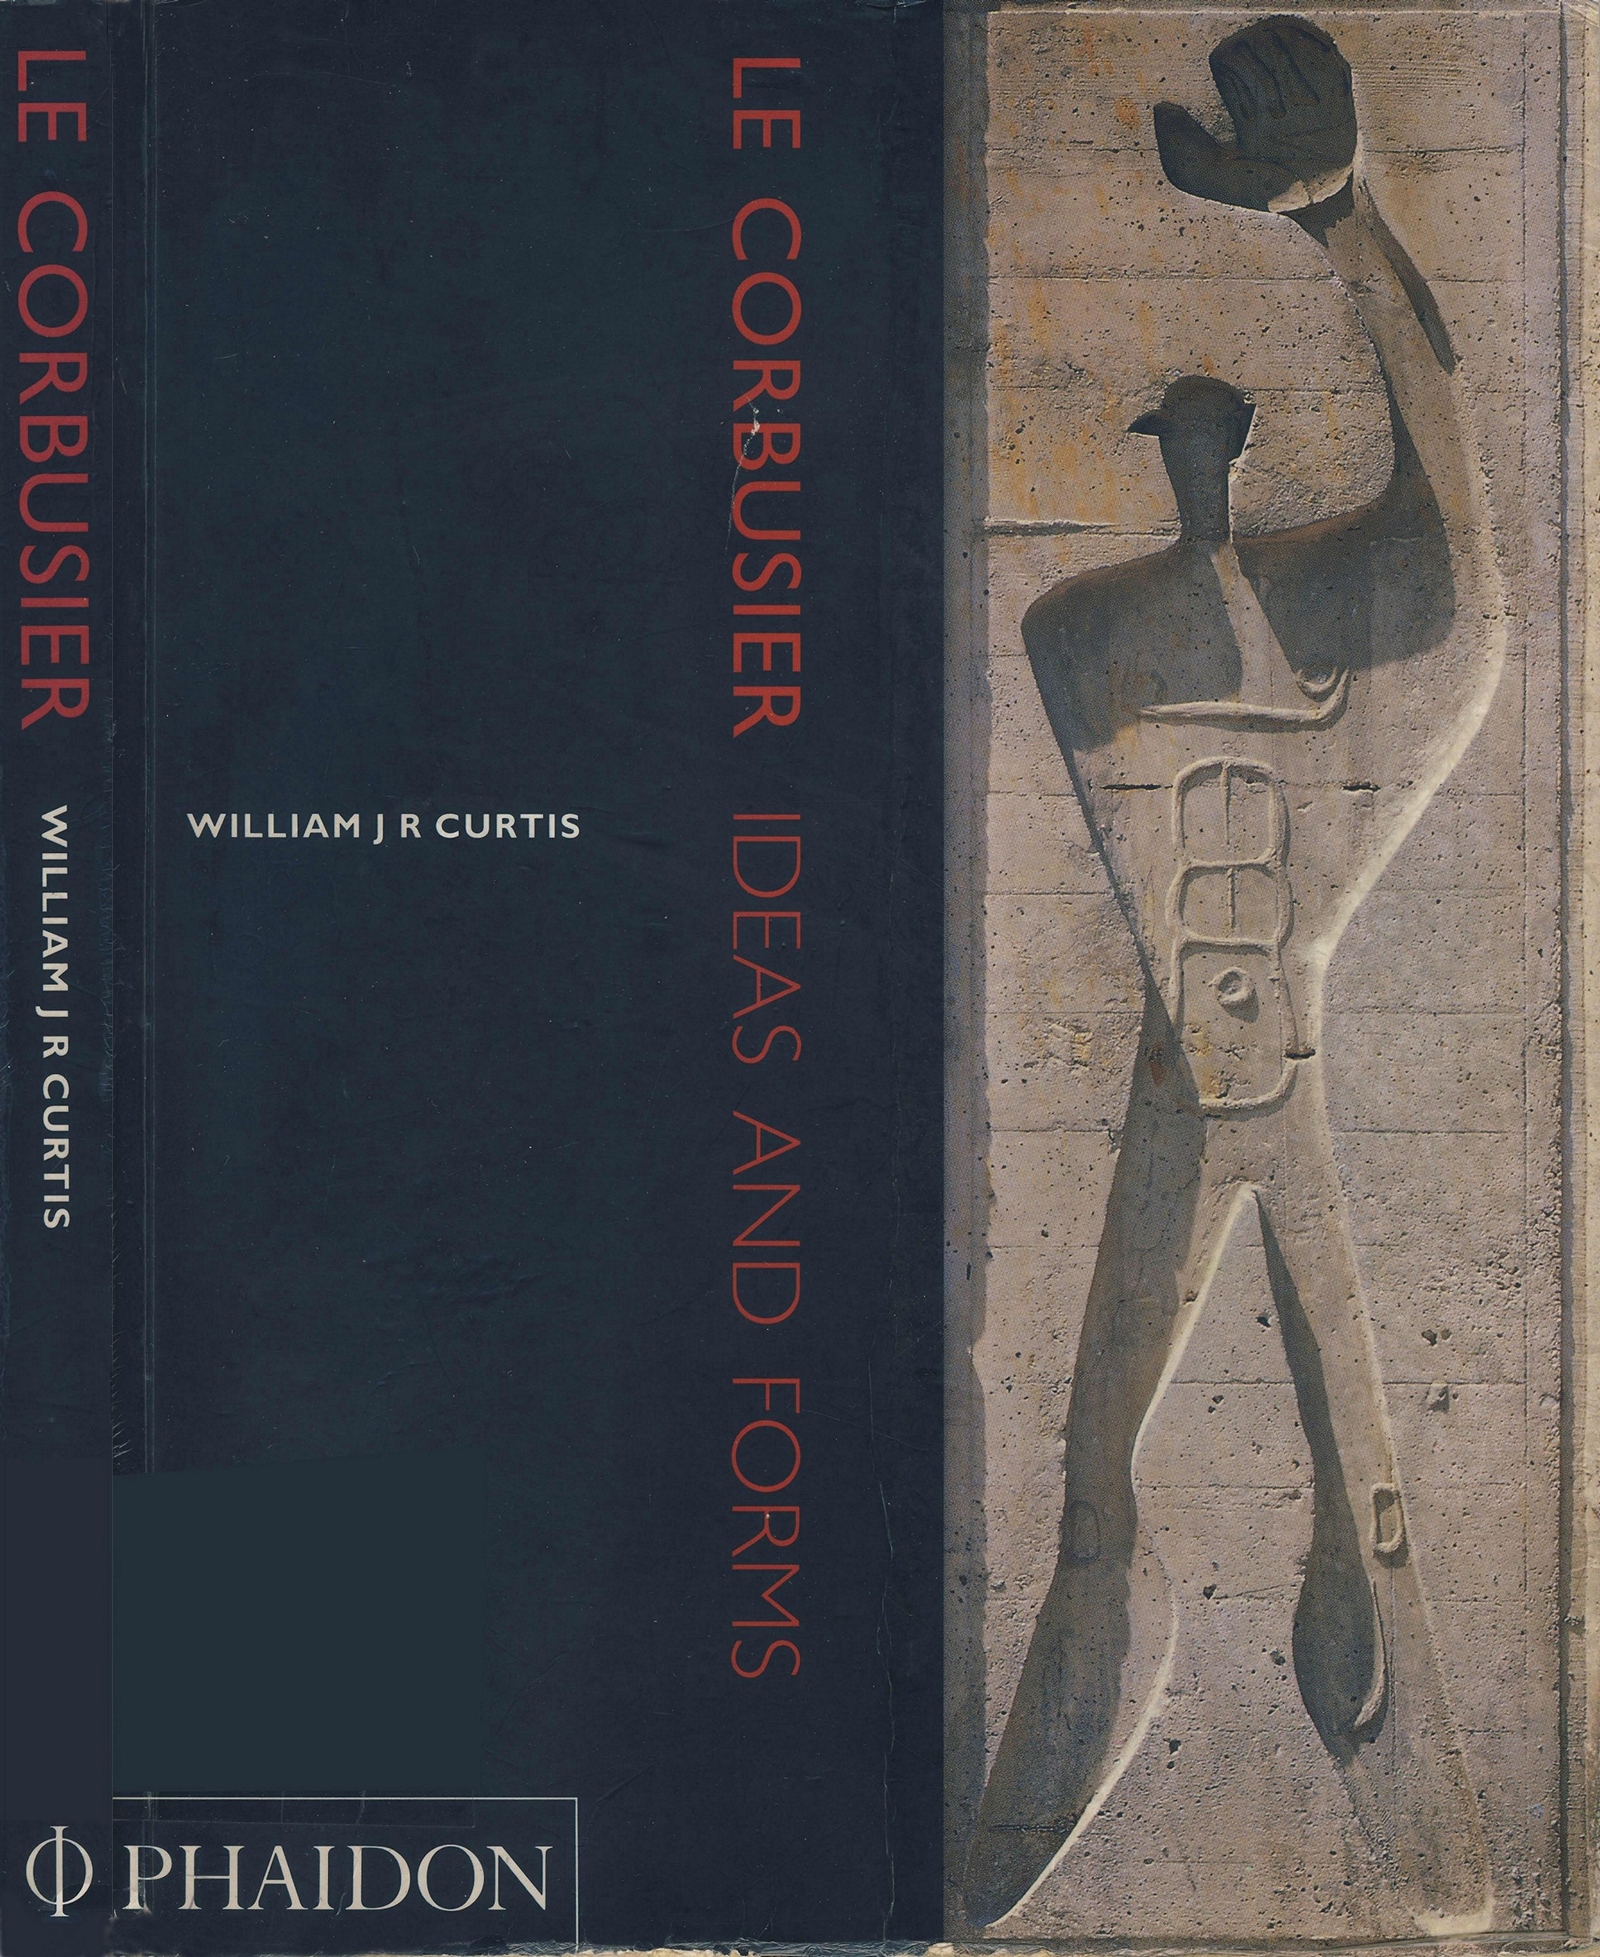 Le Corbusier: Ideas and Forms / by William J. R. Curtis. — First published 1986. — London : Phaidon Press Limited, 2001